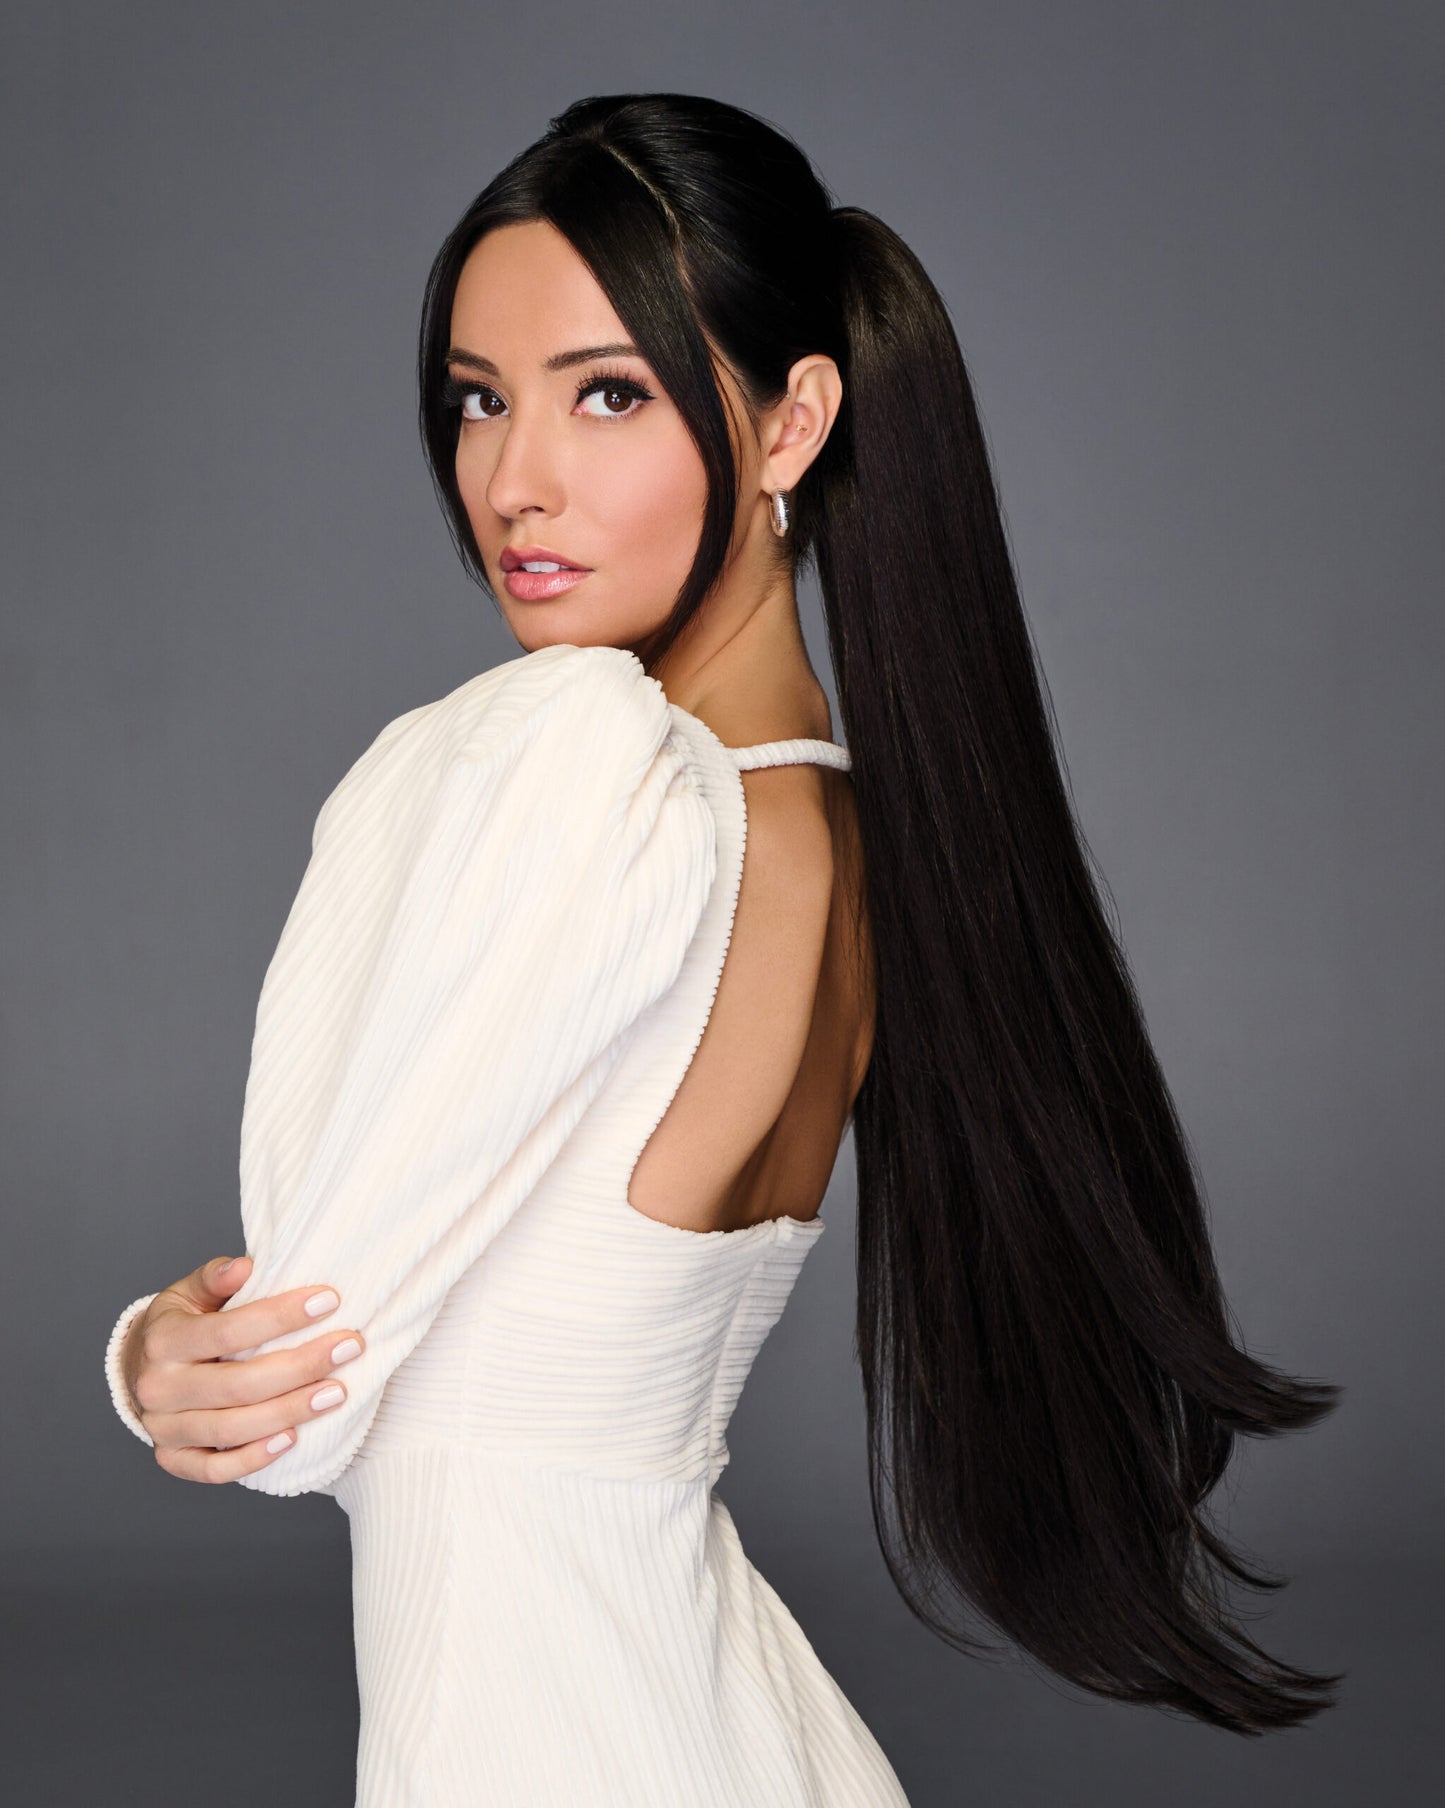 NEW! 27″ STRAIGHT CINCHED PONY by Hairdo - VIP Extensions